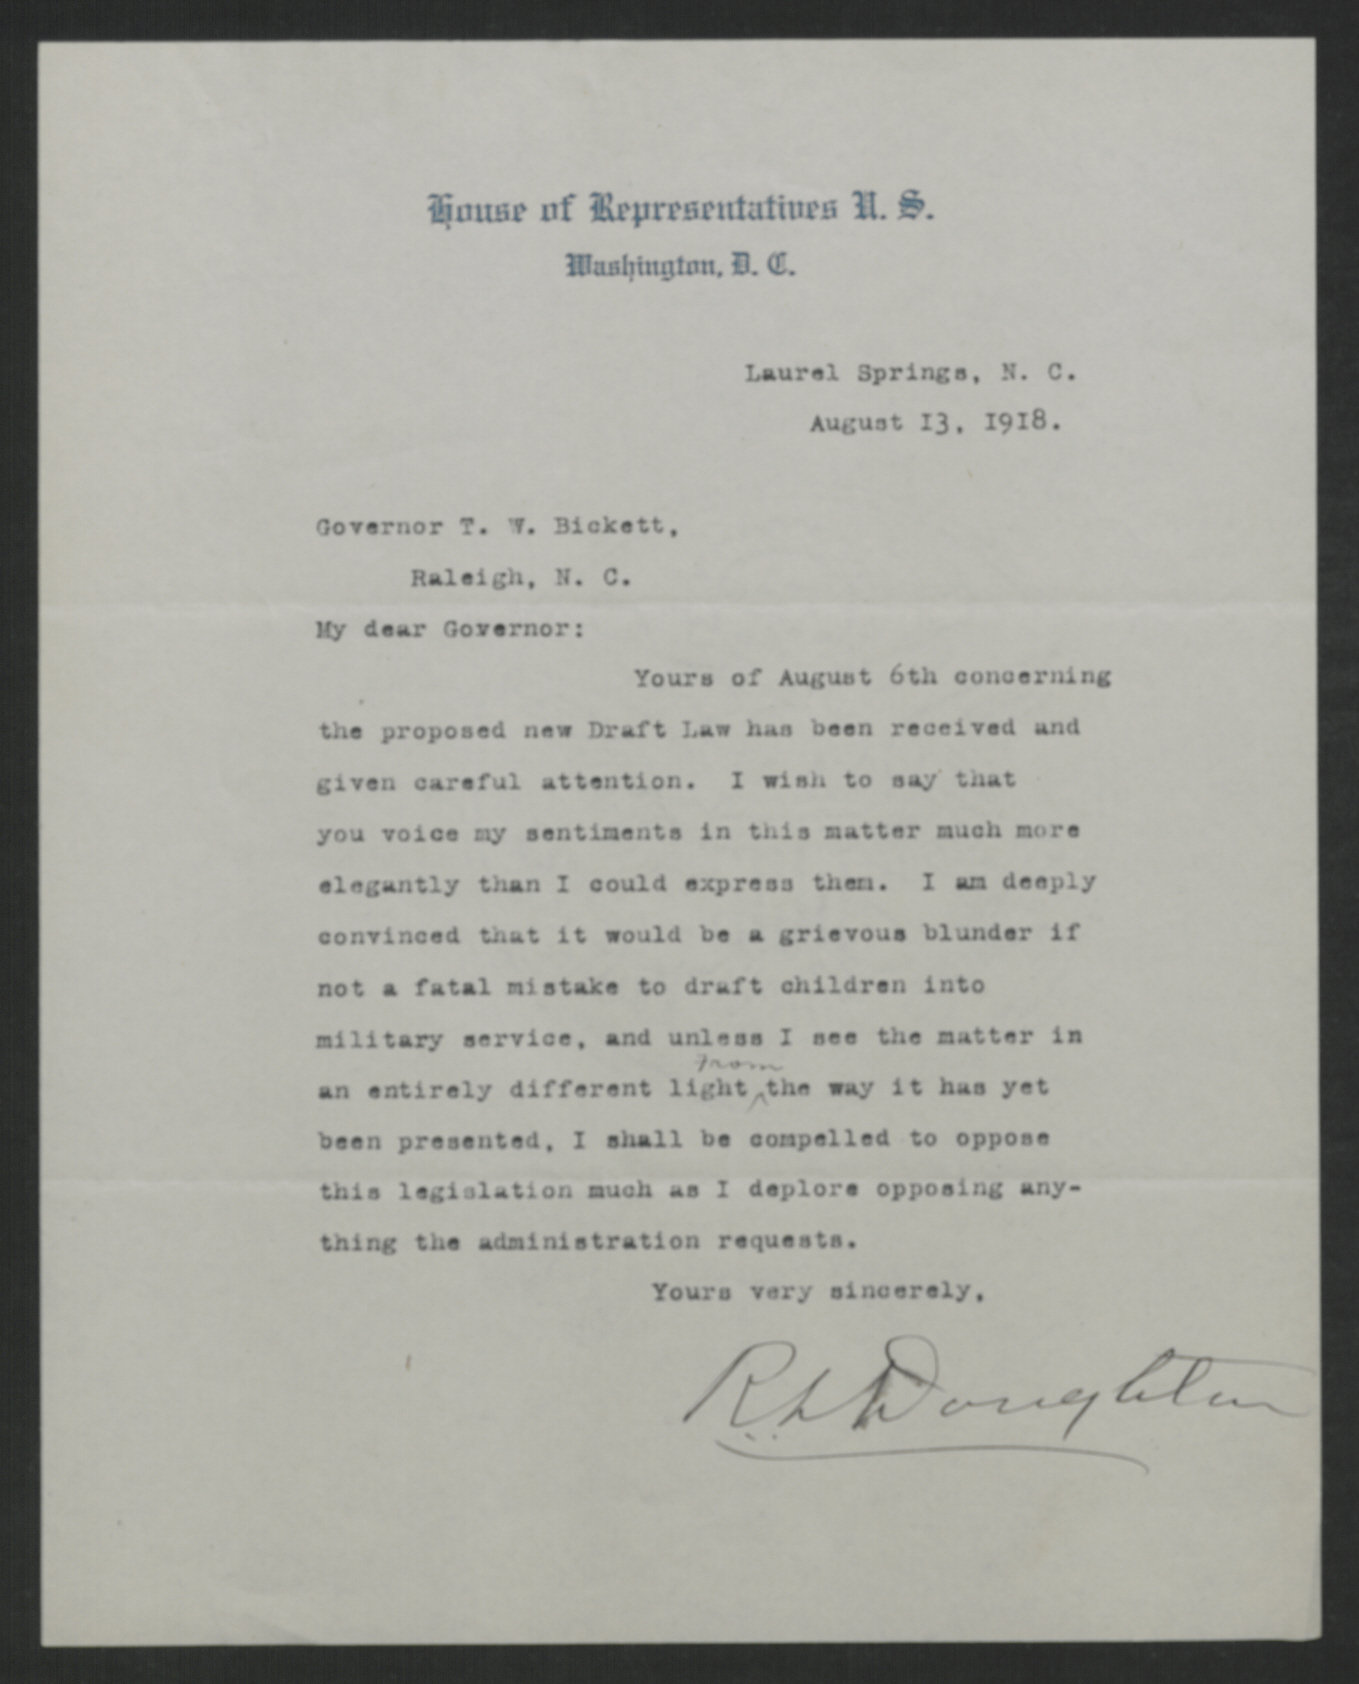 Letter from Robert L. Doughton to Thomas W. Bickett, August 13, 1918